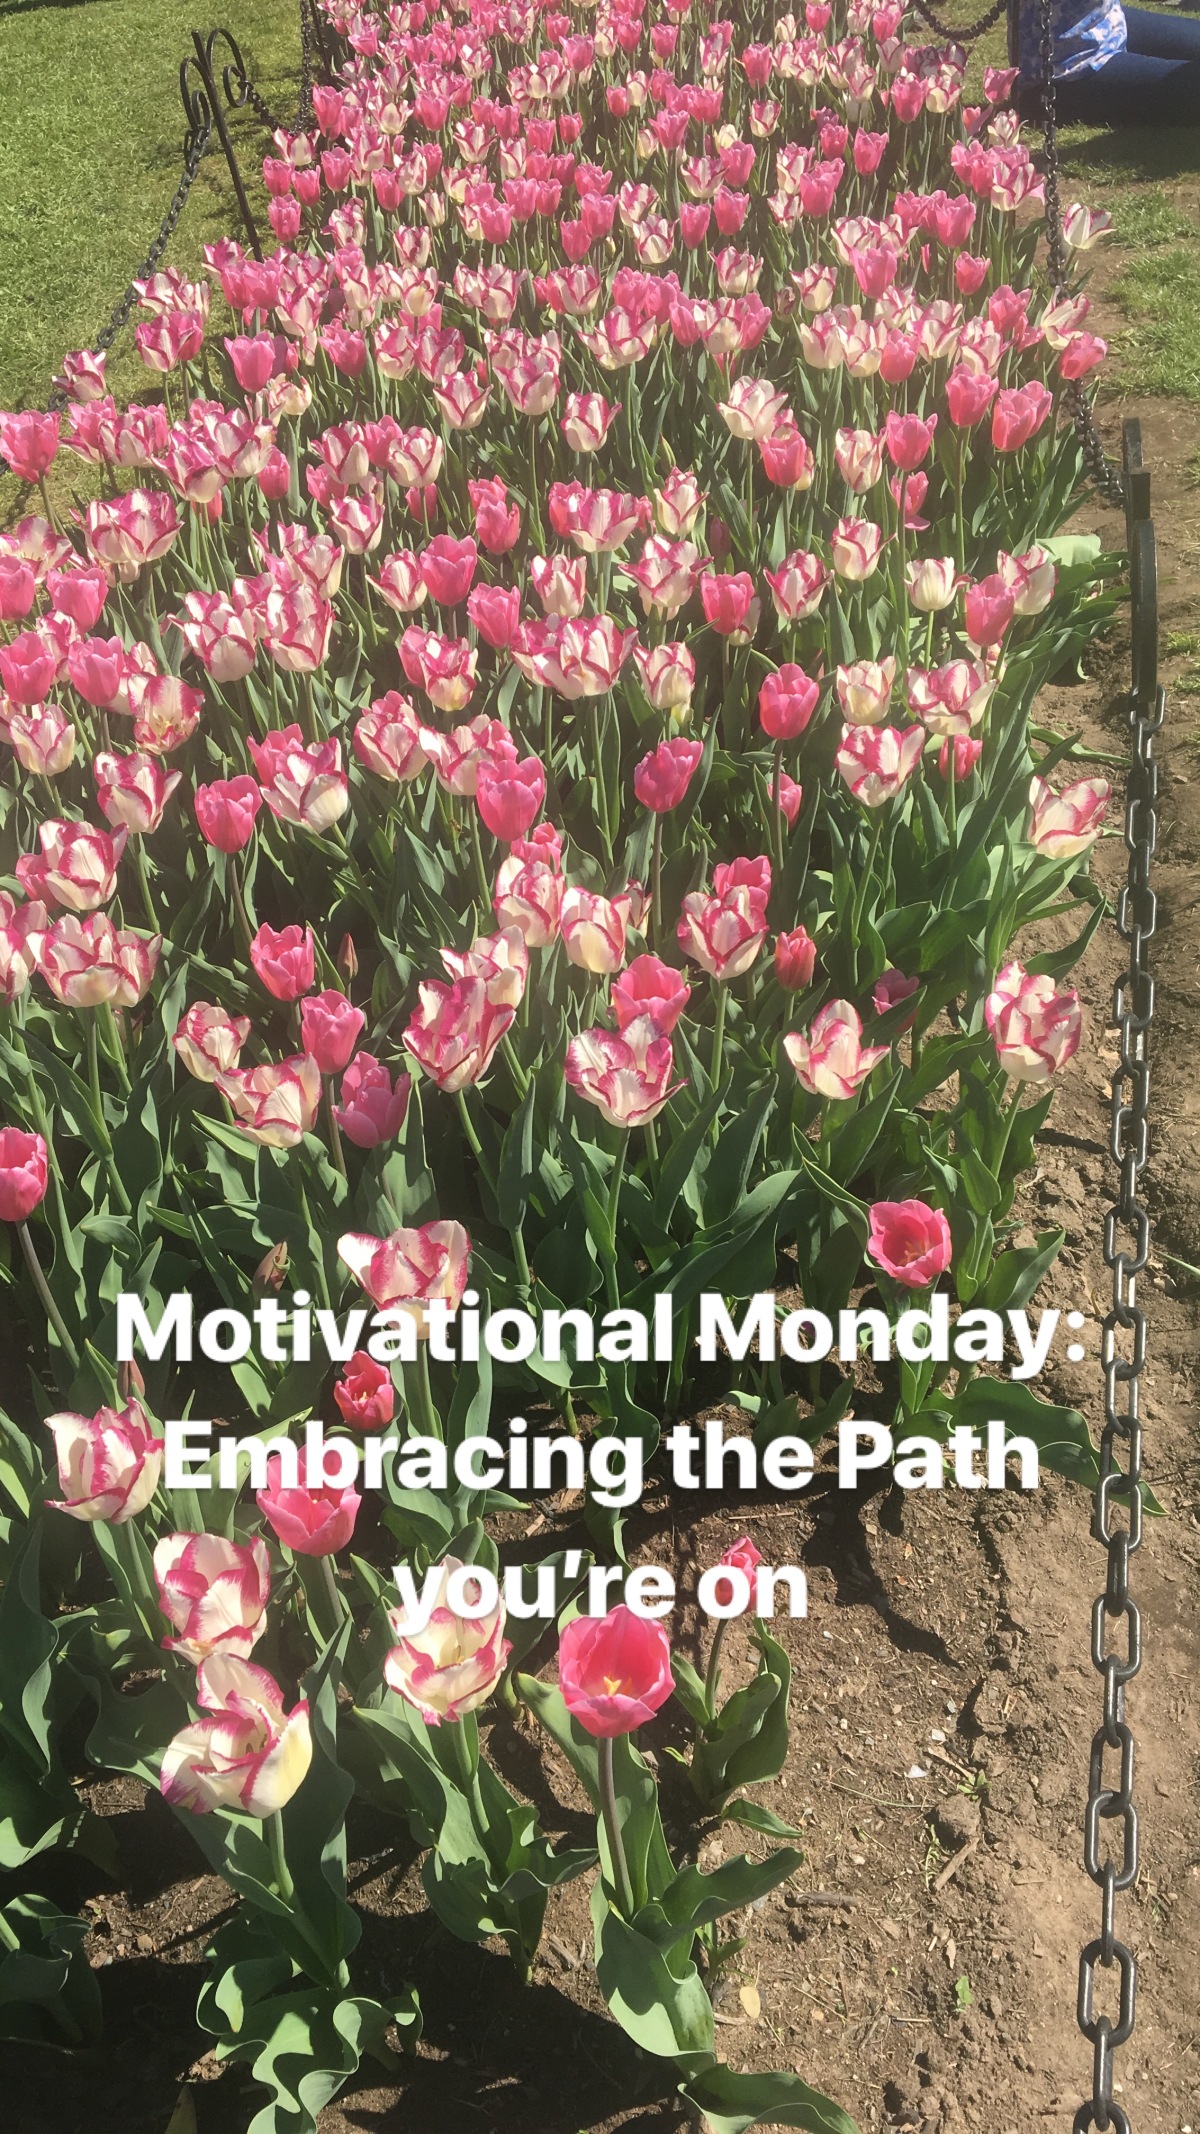 Motivational Monday: Embracing the Path you’re on